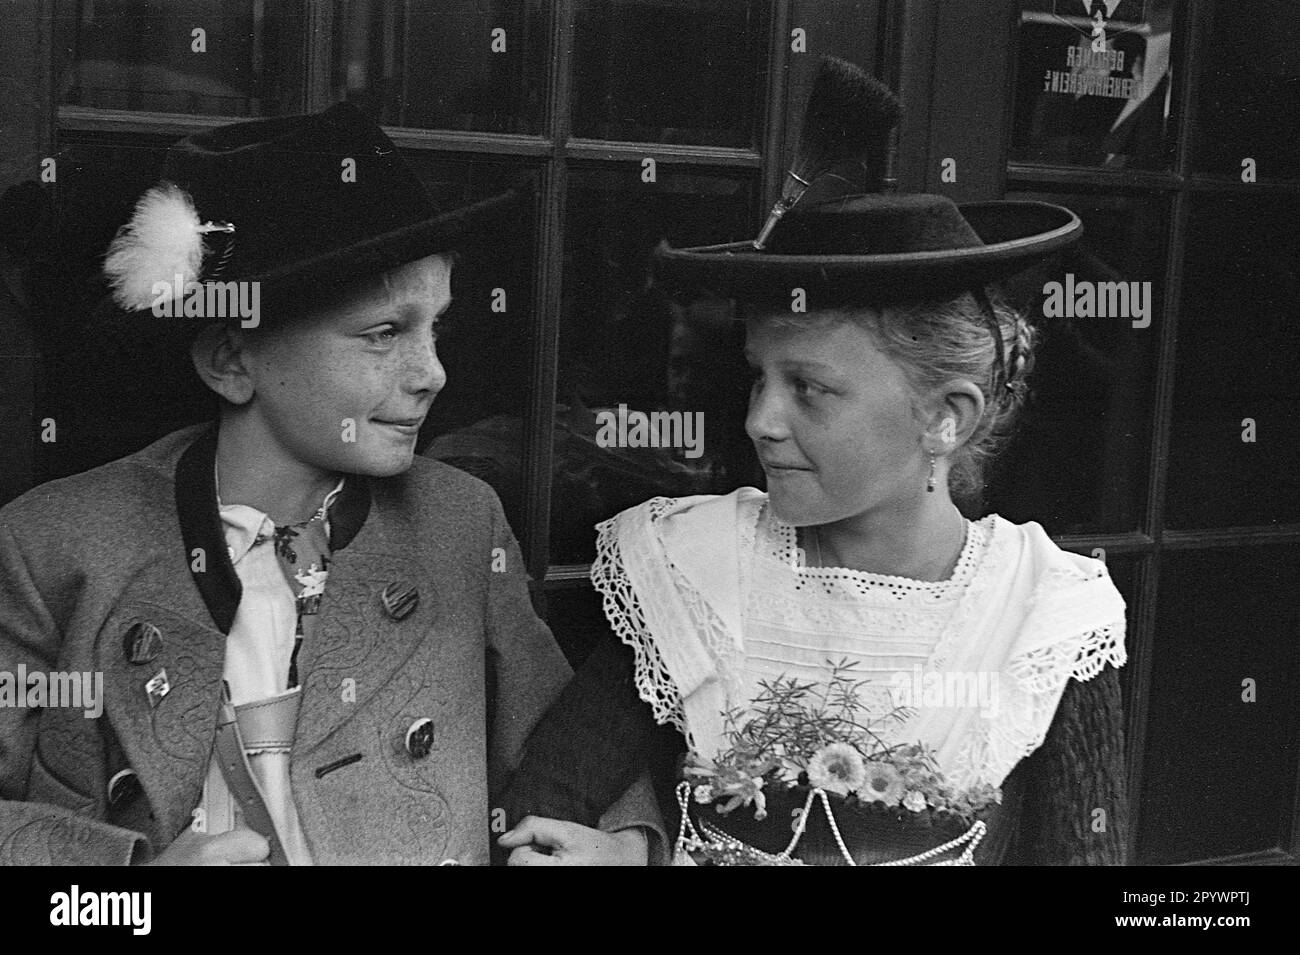 A boy and a girl in traditional clothes. Presumably in Berlin, 1935. Stock Photo